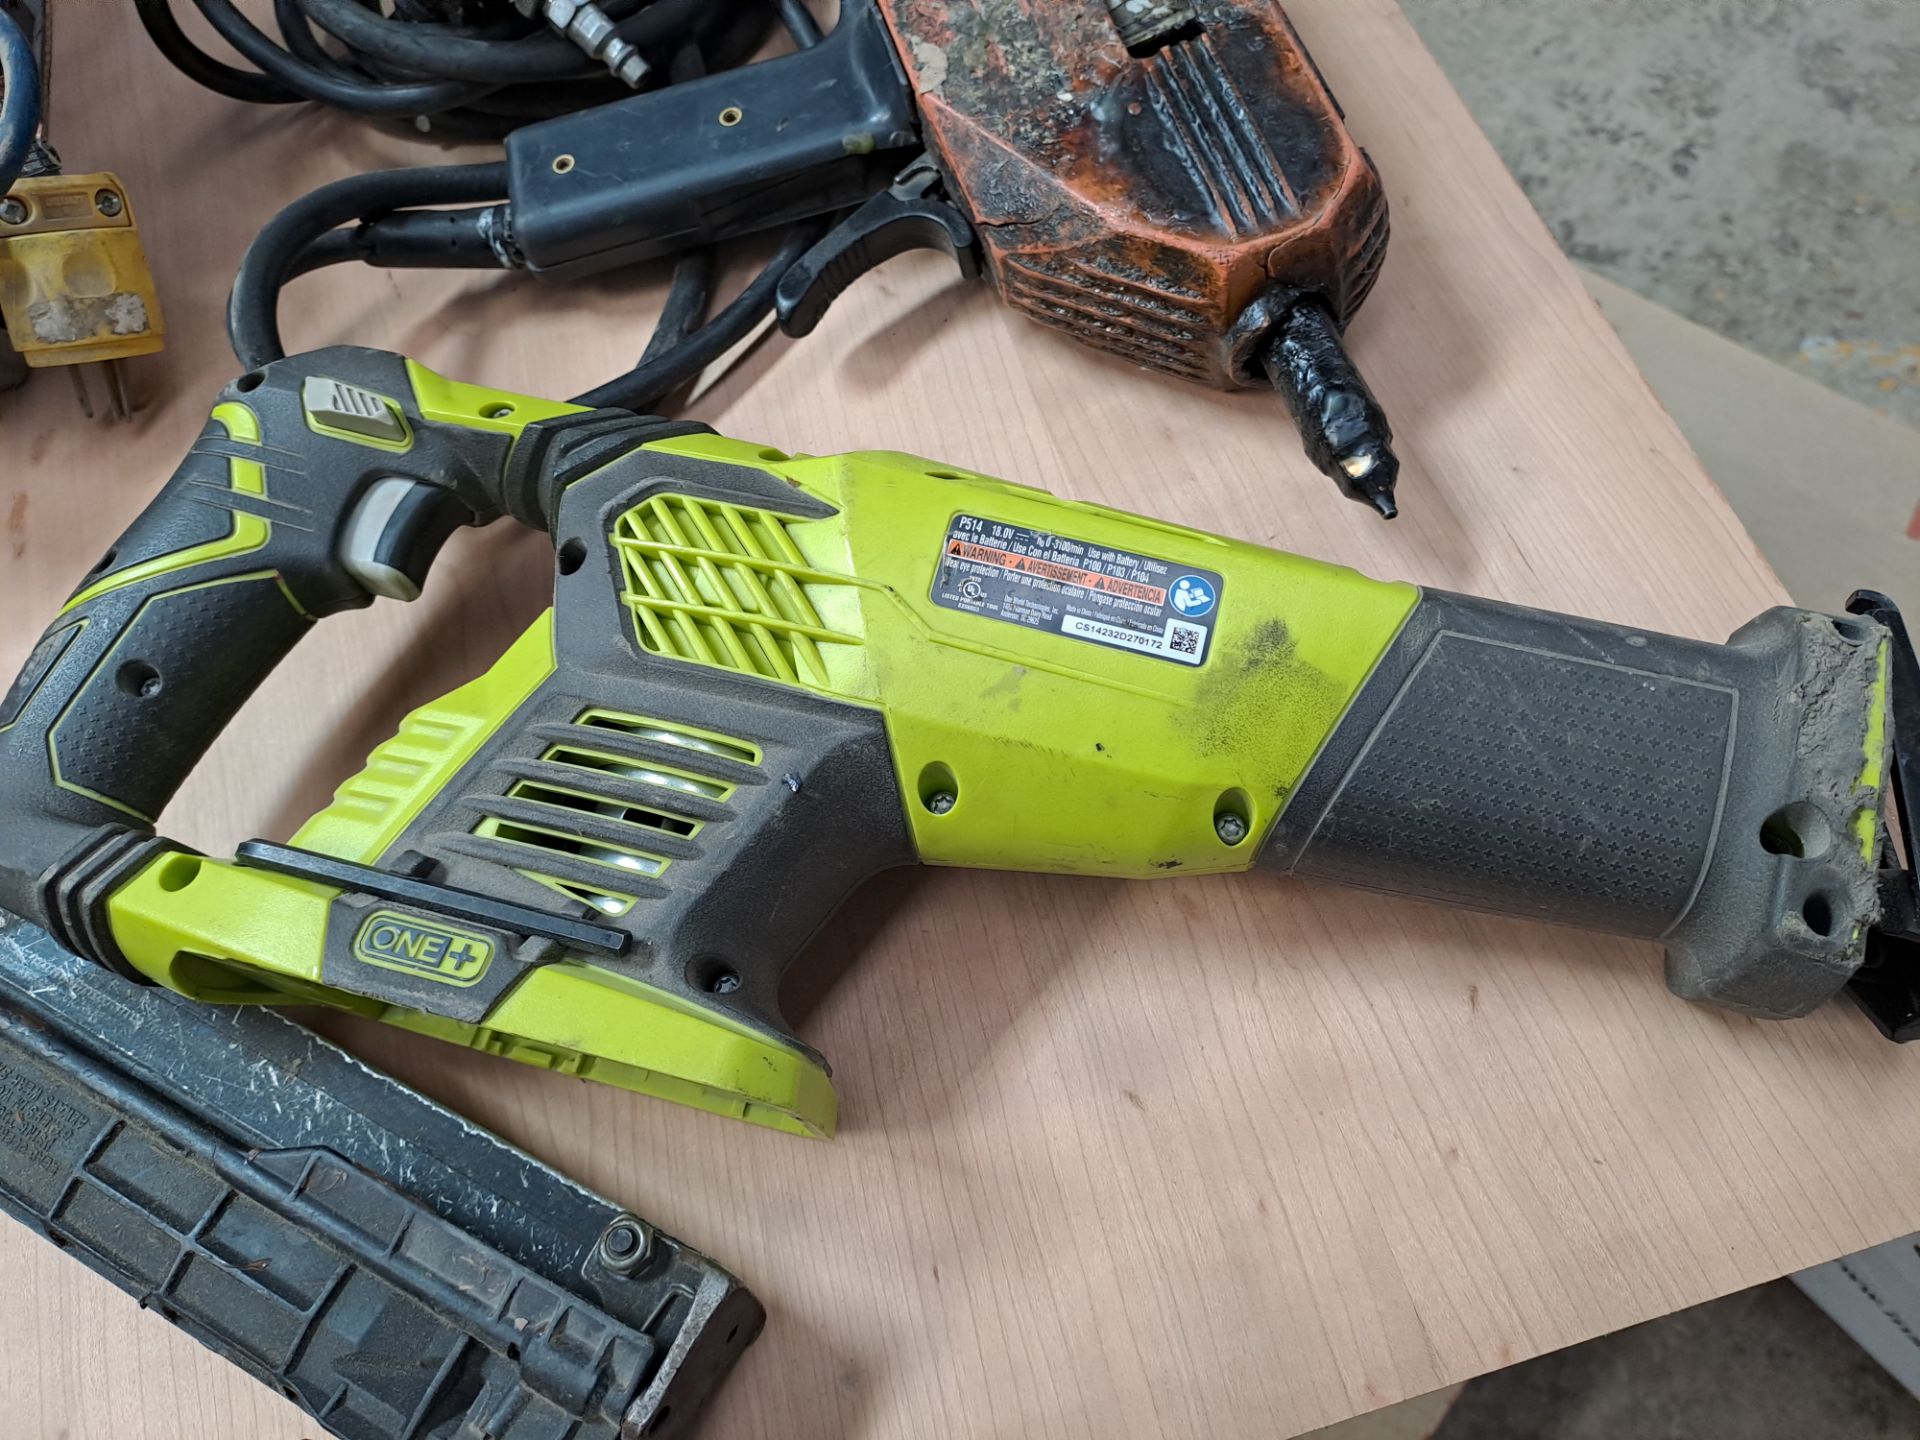 Lot of 4 pieces contains: 1 Porter electric sander with dust collector; 1 Ryobi wood saw without ba - Image 6 of 14